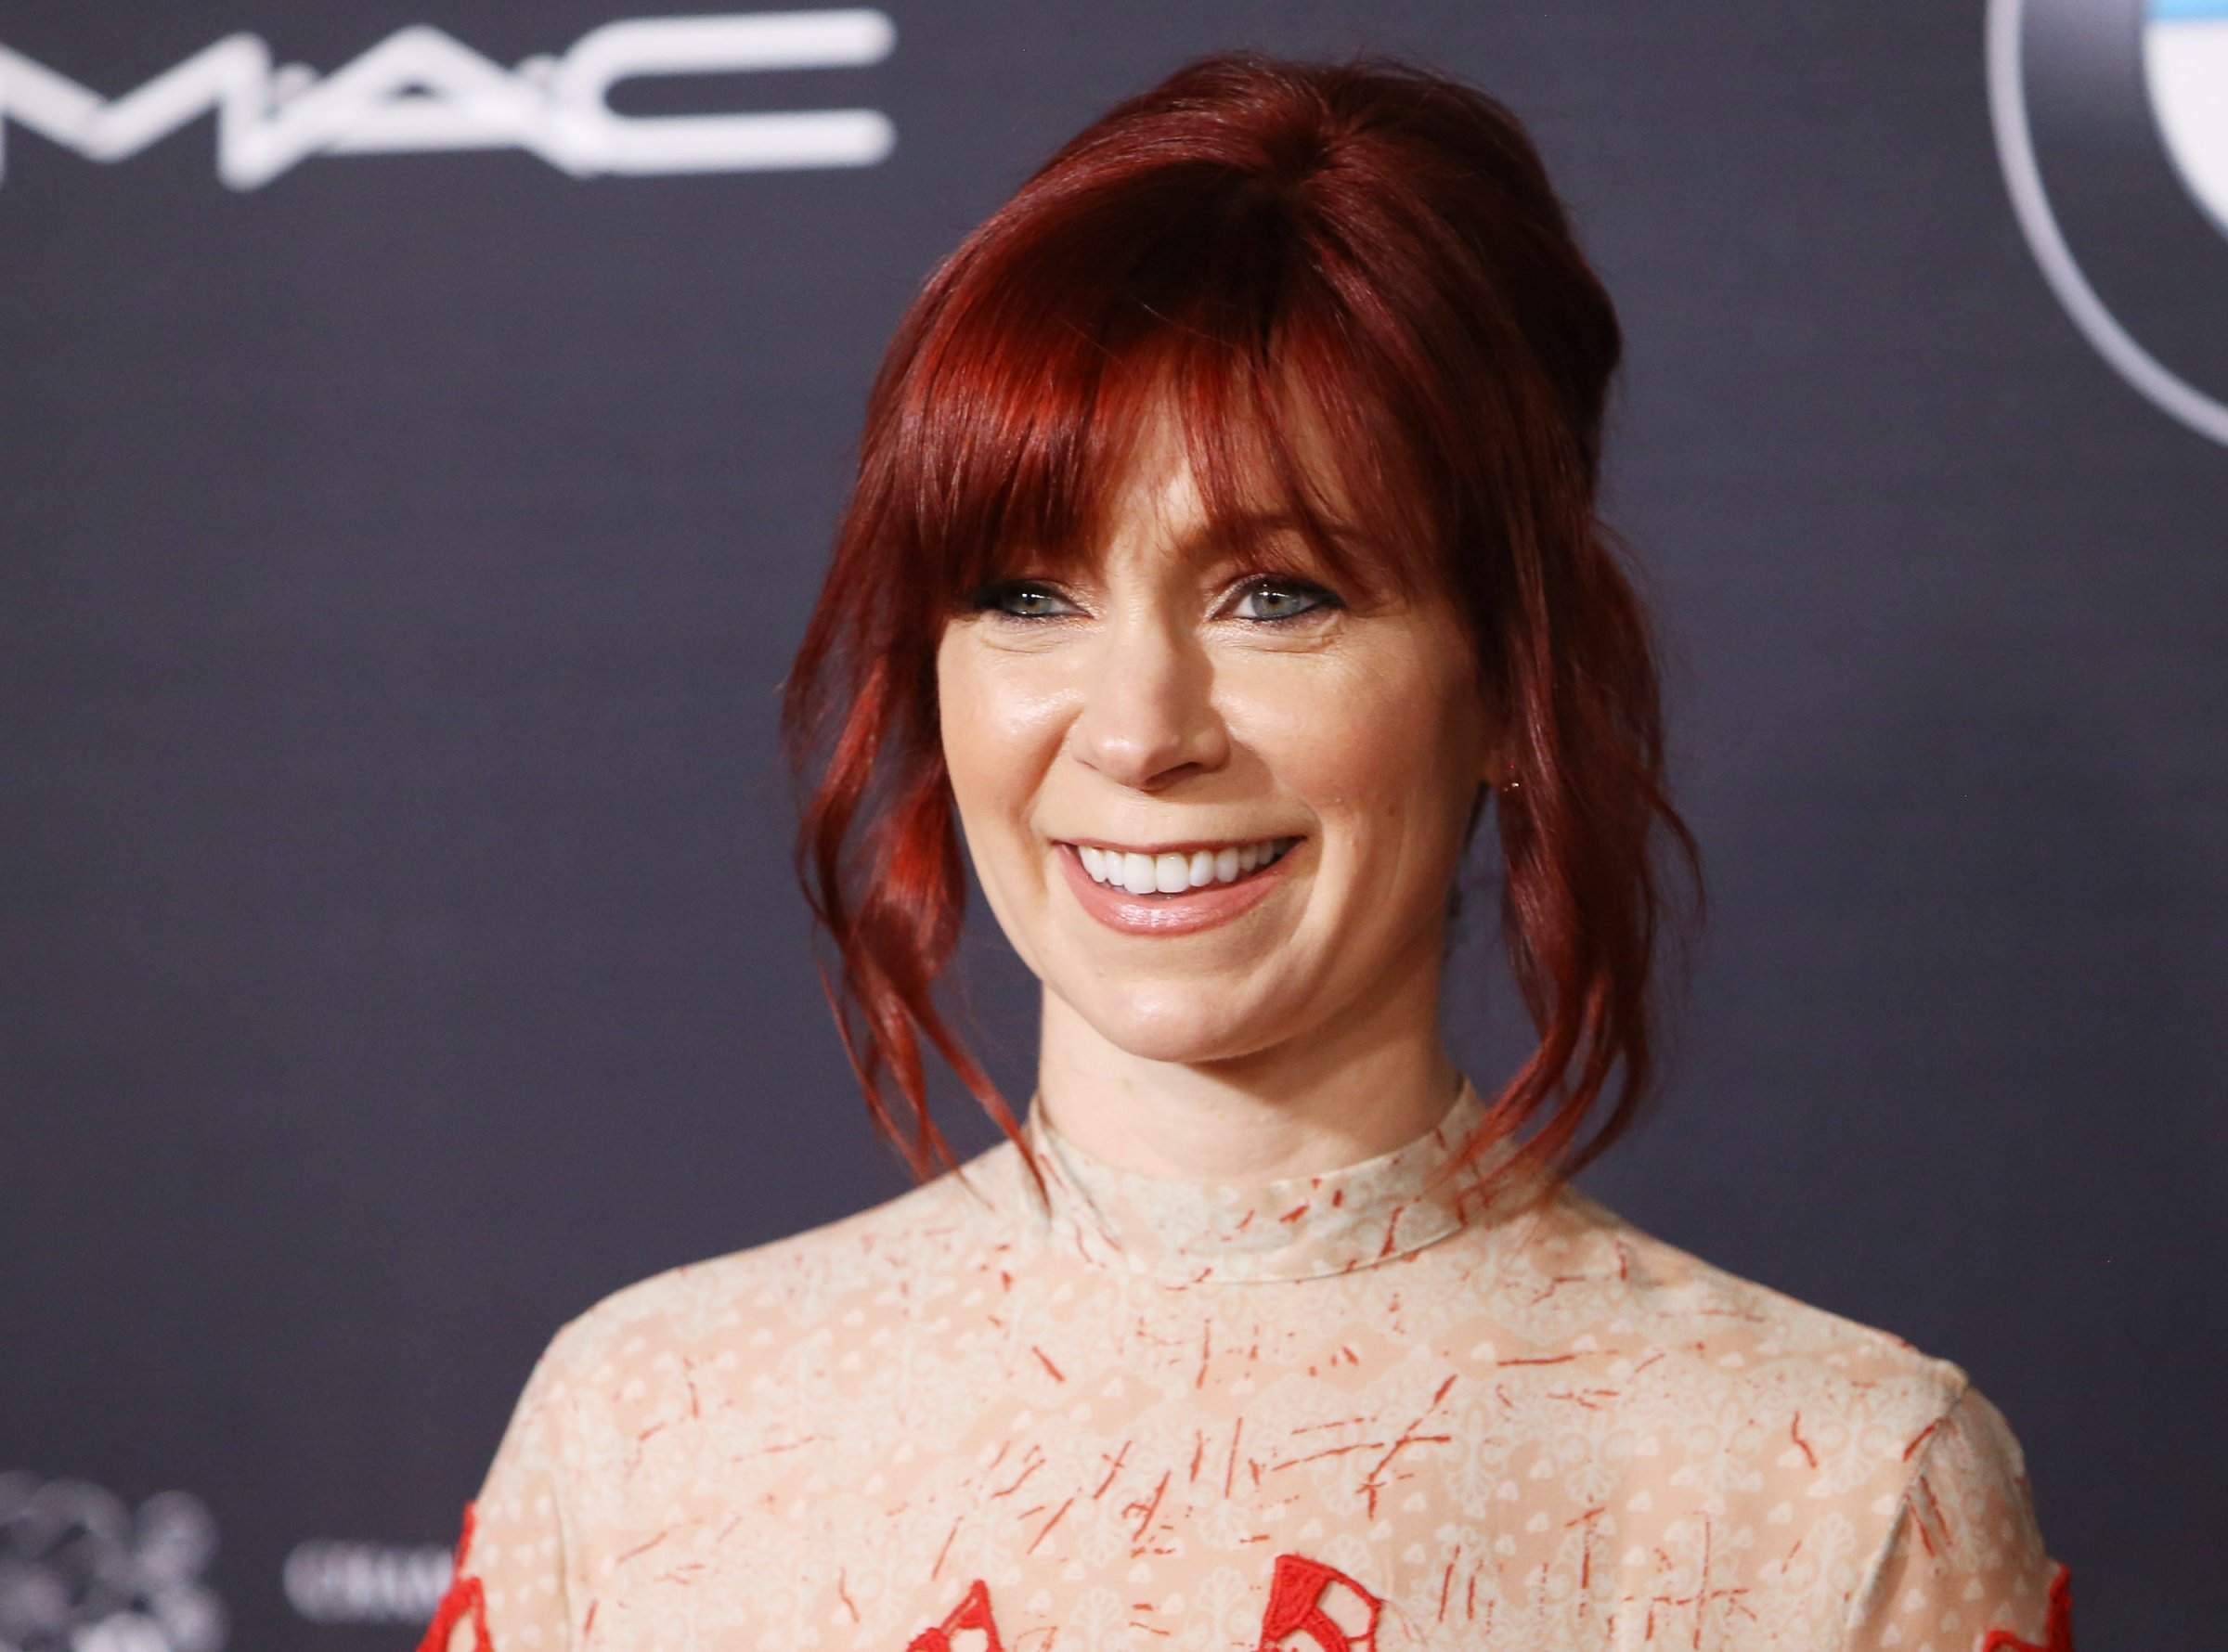 Carrie Preston arrives at the Ninth Annual Women In Film pre-Oscar Cocktail Party held at HYDE Sunset: Kitchen + Cocktails on February 26, 2016 in West Hollywood, California.